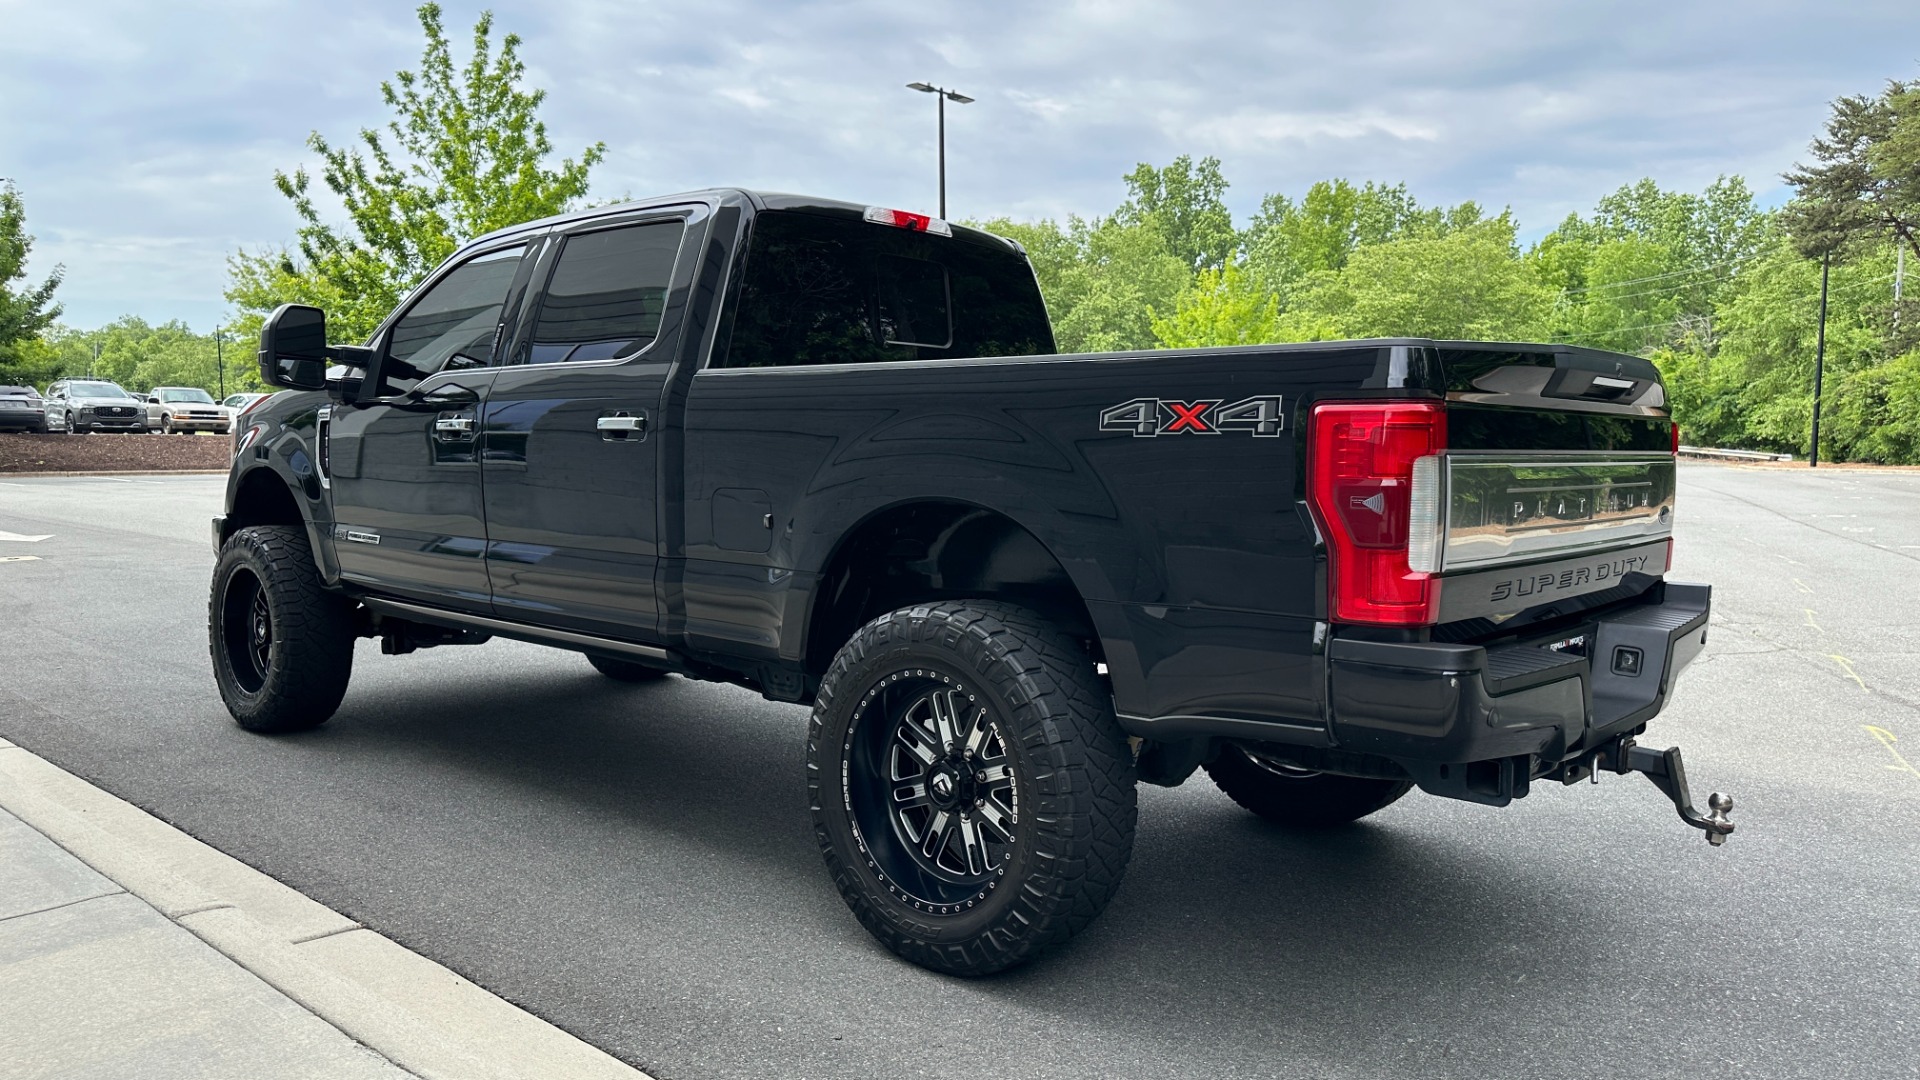 Used 2017 Ford Super Duty F-250 SRW PLATINUM / FABTECH LIFT / FUEL WHEELS / PANORAMIC ROOF / ROCK LIGHTS for sale $62,995 at Formula Imports in Charlotte NC 28227 3